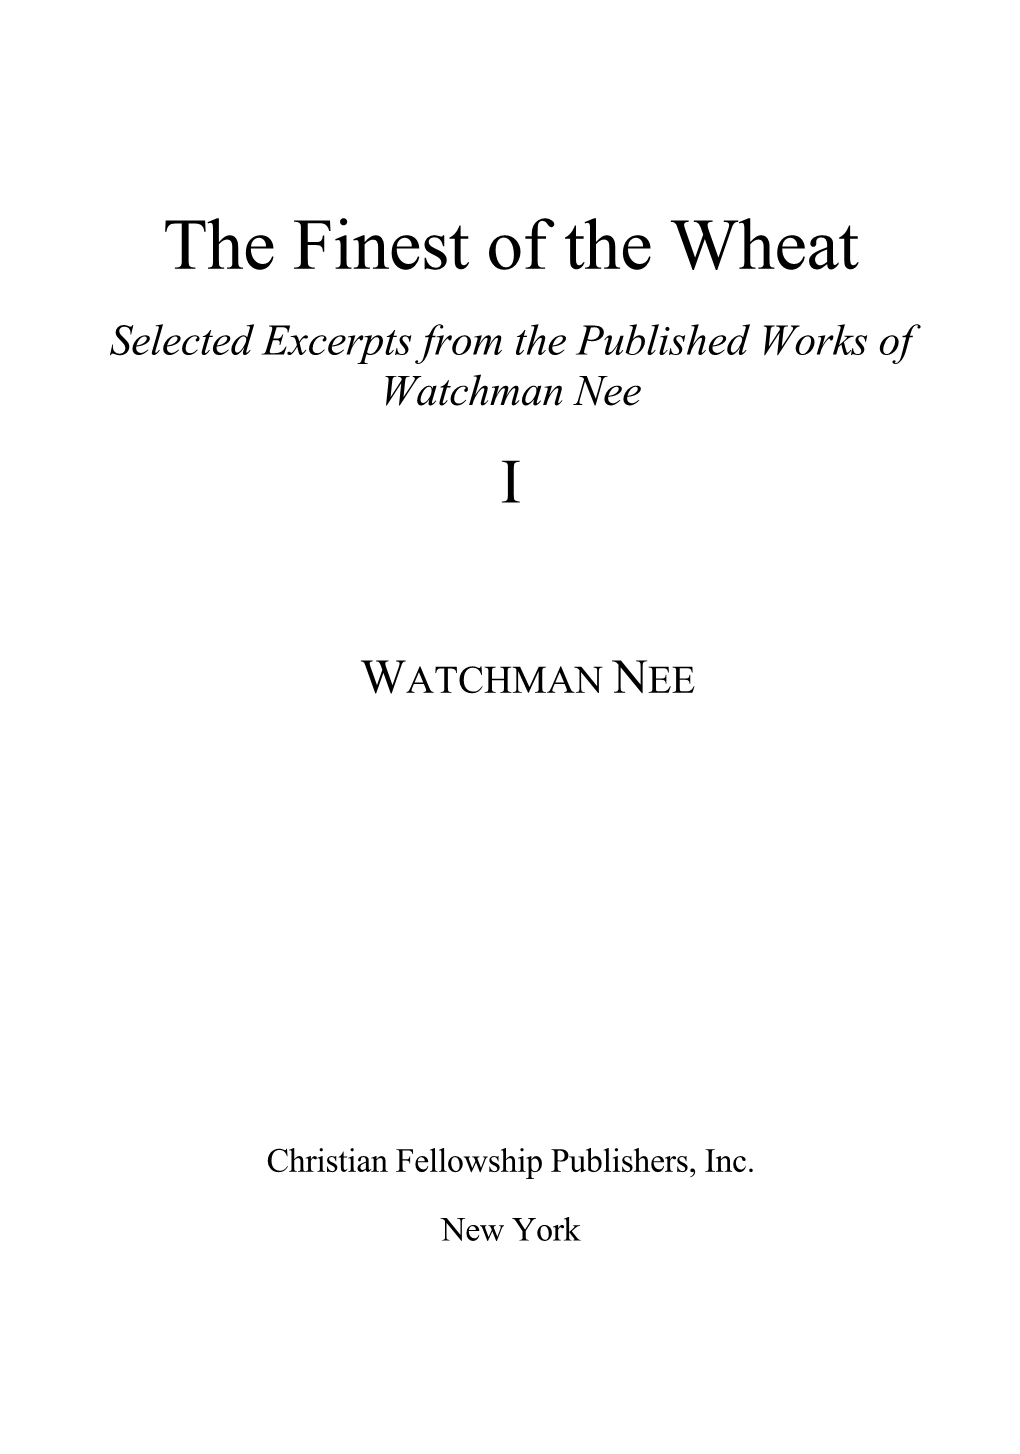 The Finest of the Wheat 1 -Watchman